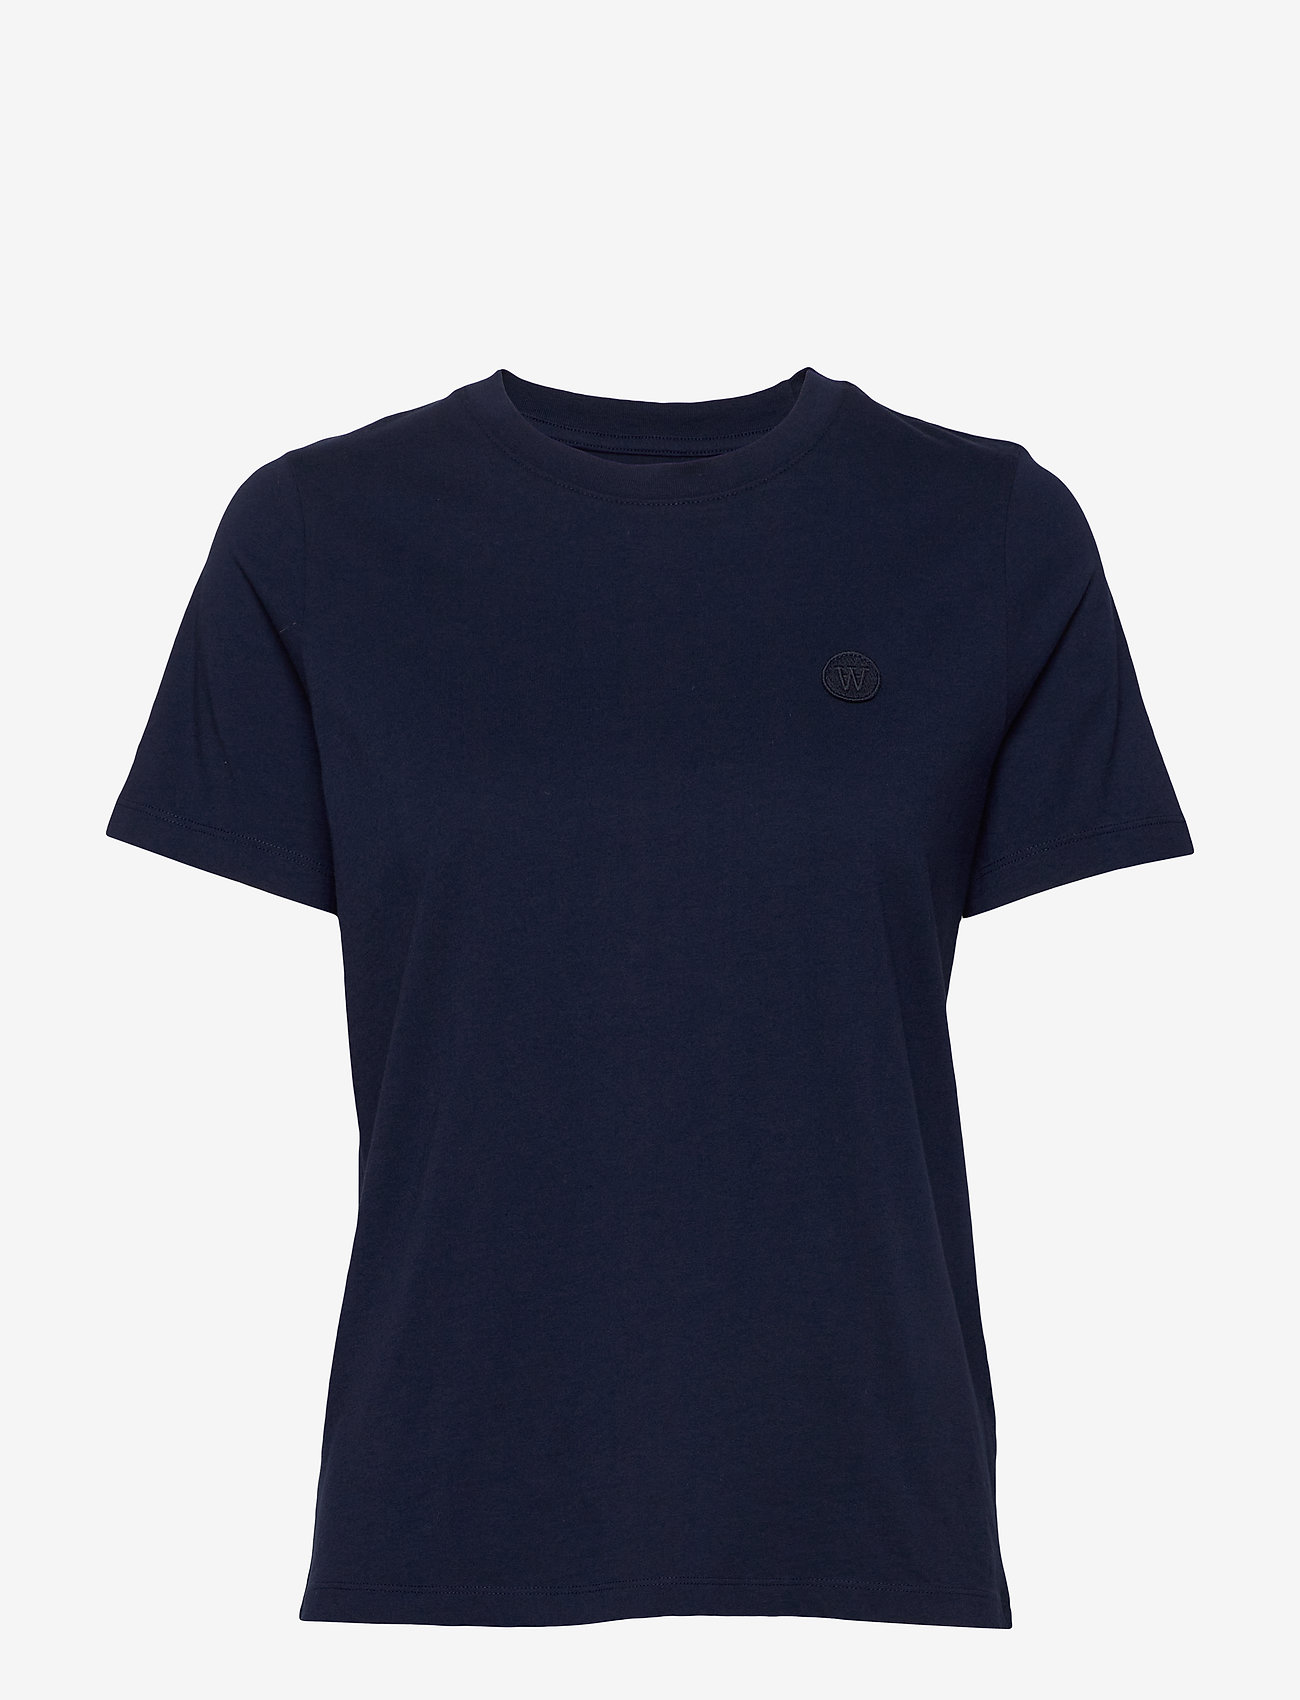 Double A by Wood Wood - Mia T-shirt - t-shirt & tops - navy - 0